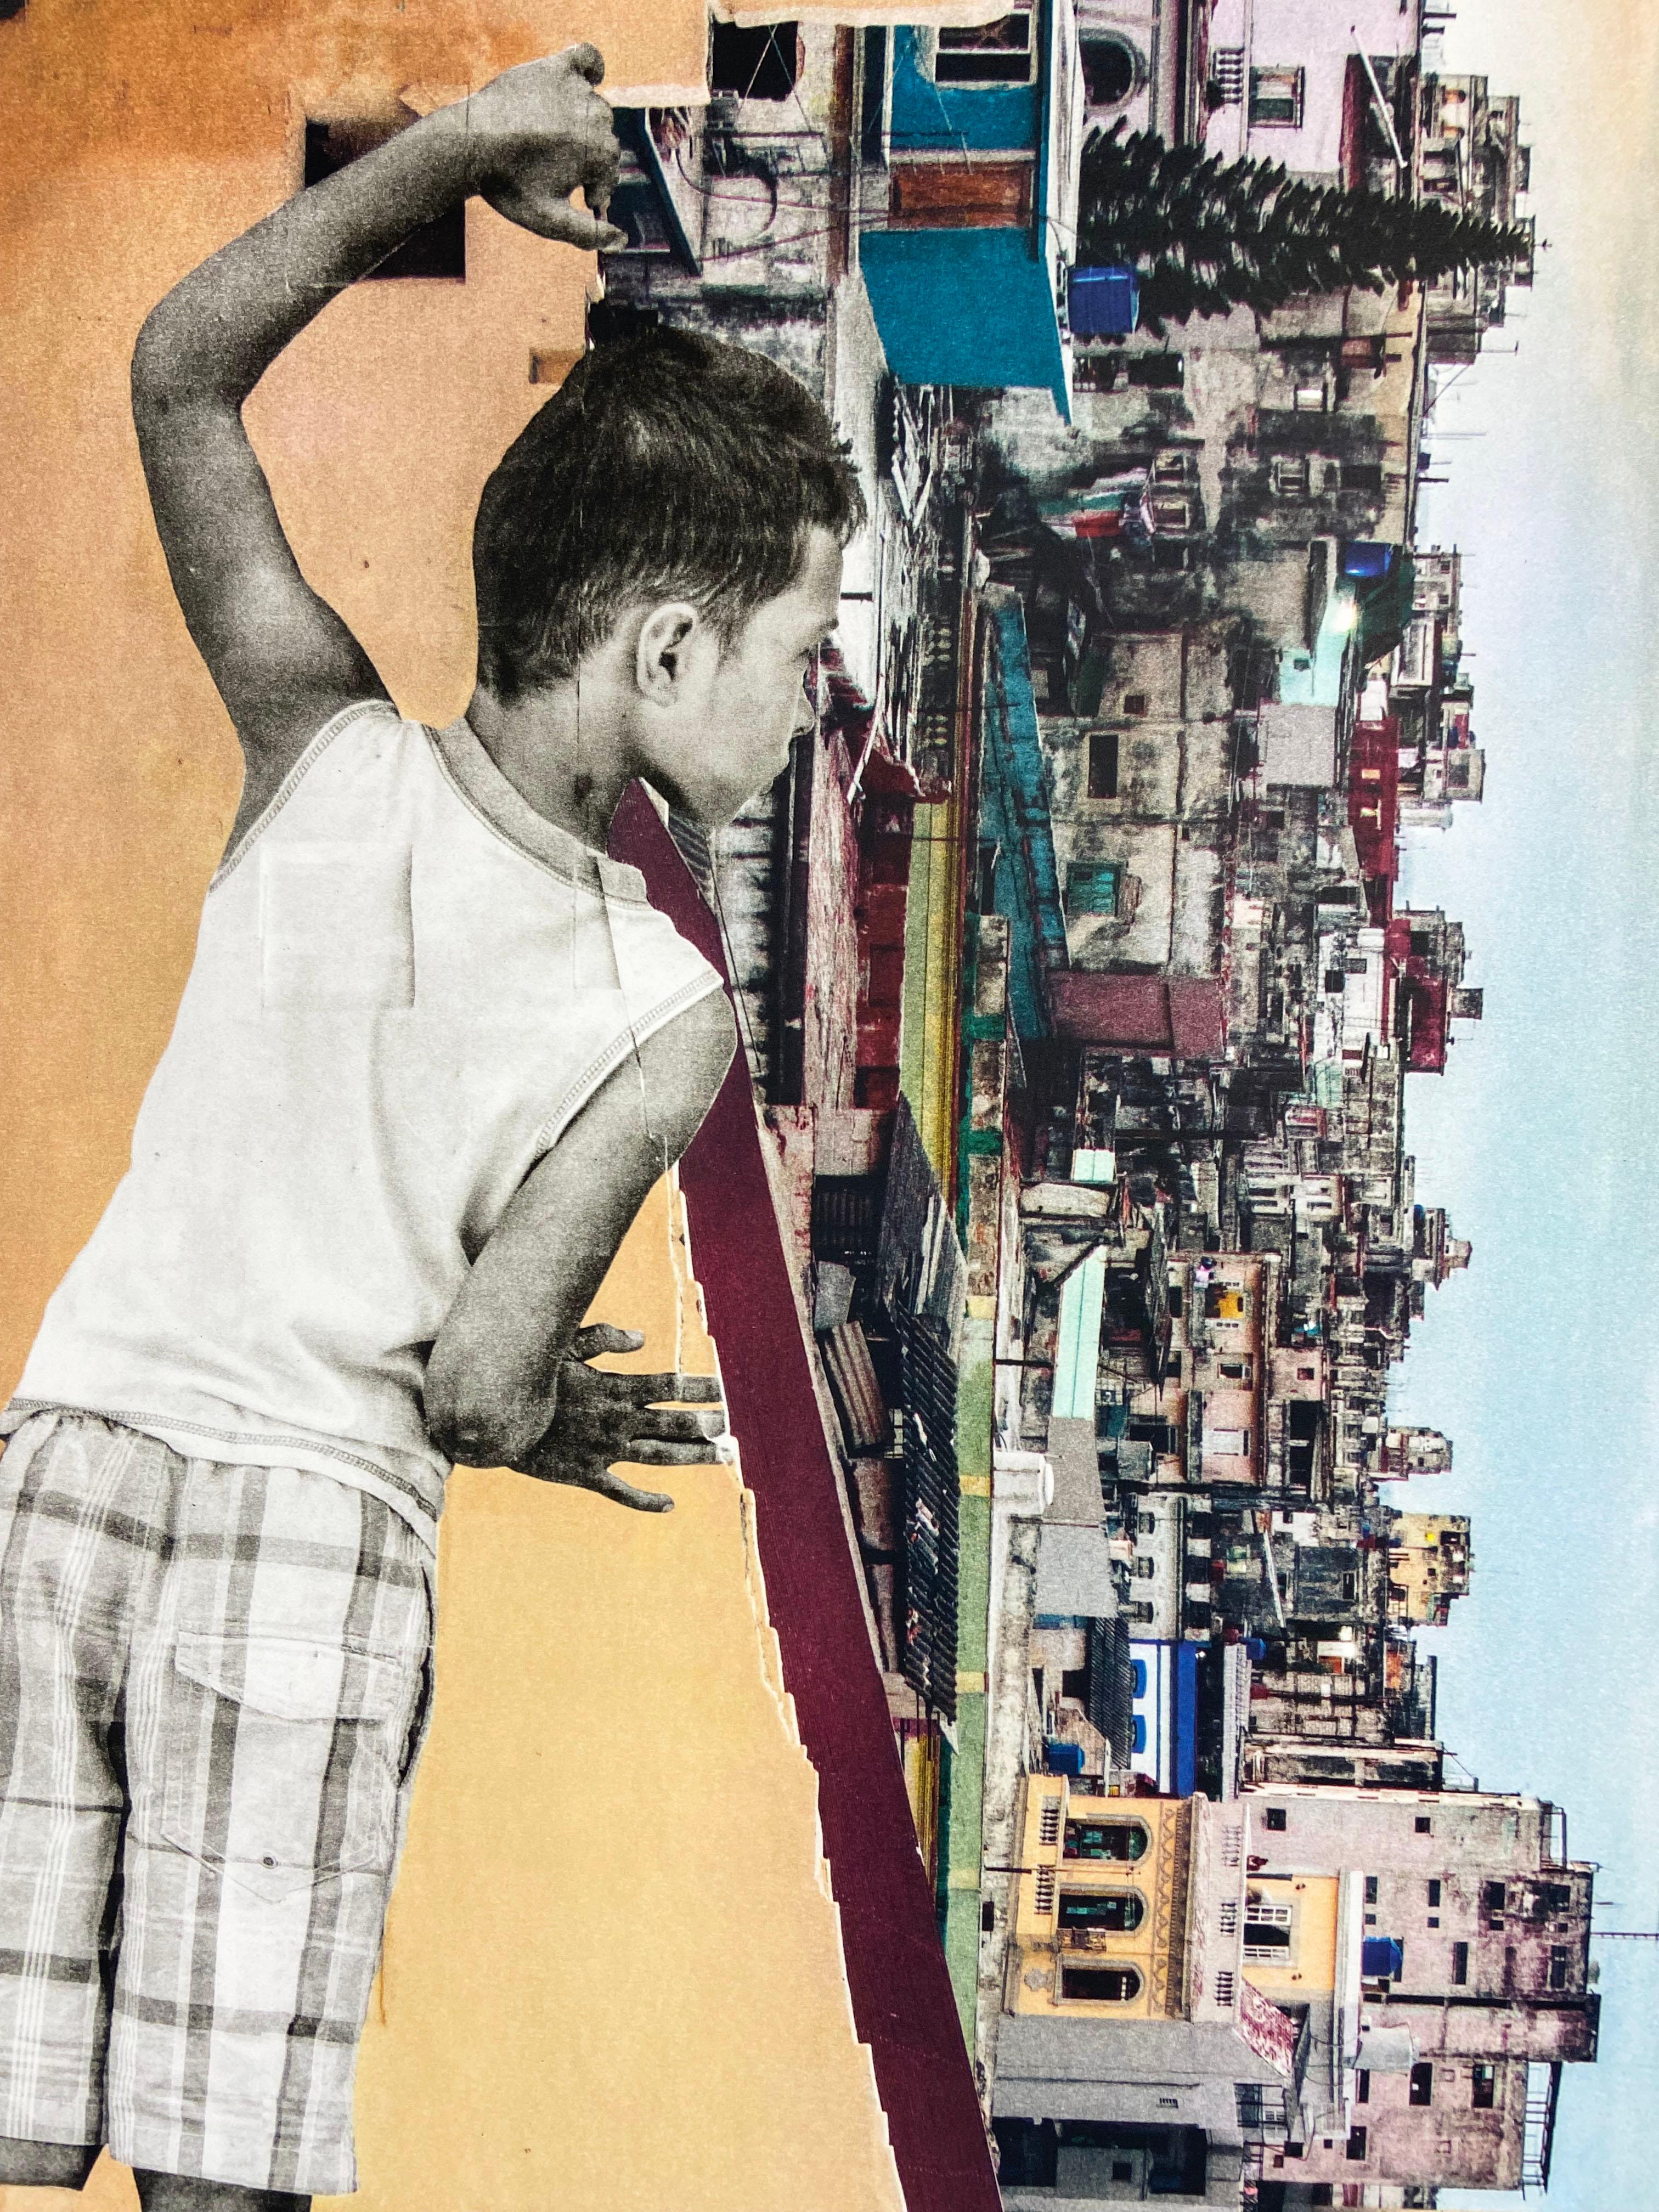 JR (French, b. 1983)
Giants, Alain, April 13, 08.22 P.M., Havana, Cuba, 2019
Medium : 17 colors lithograph on wove paper
Dimensions : 100 x 70 cm (39.5 x 27.5 in)
Edition of 180: Hand-signed and numbered
Condition: Mint